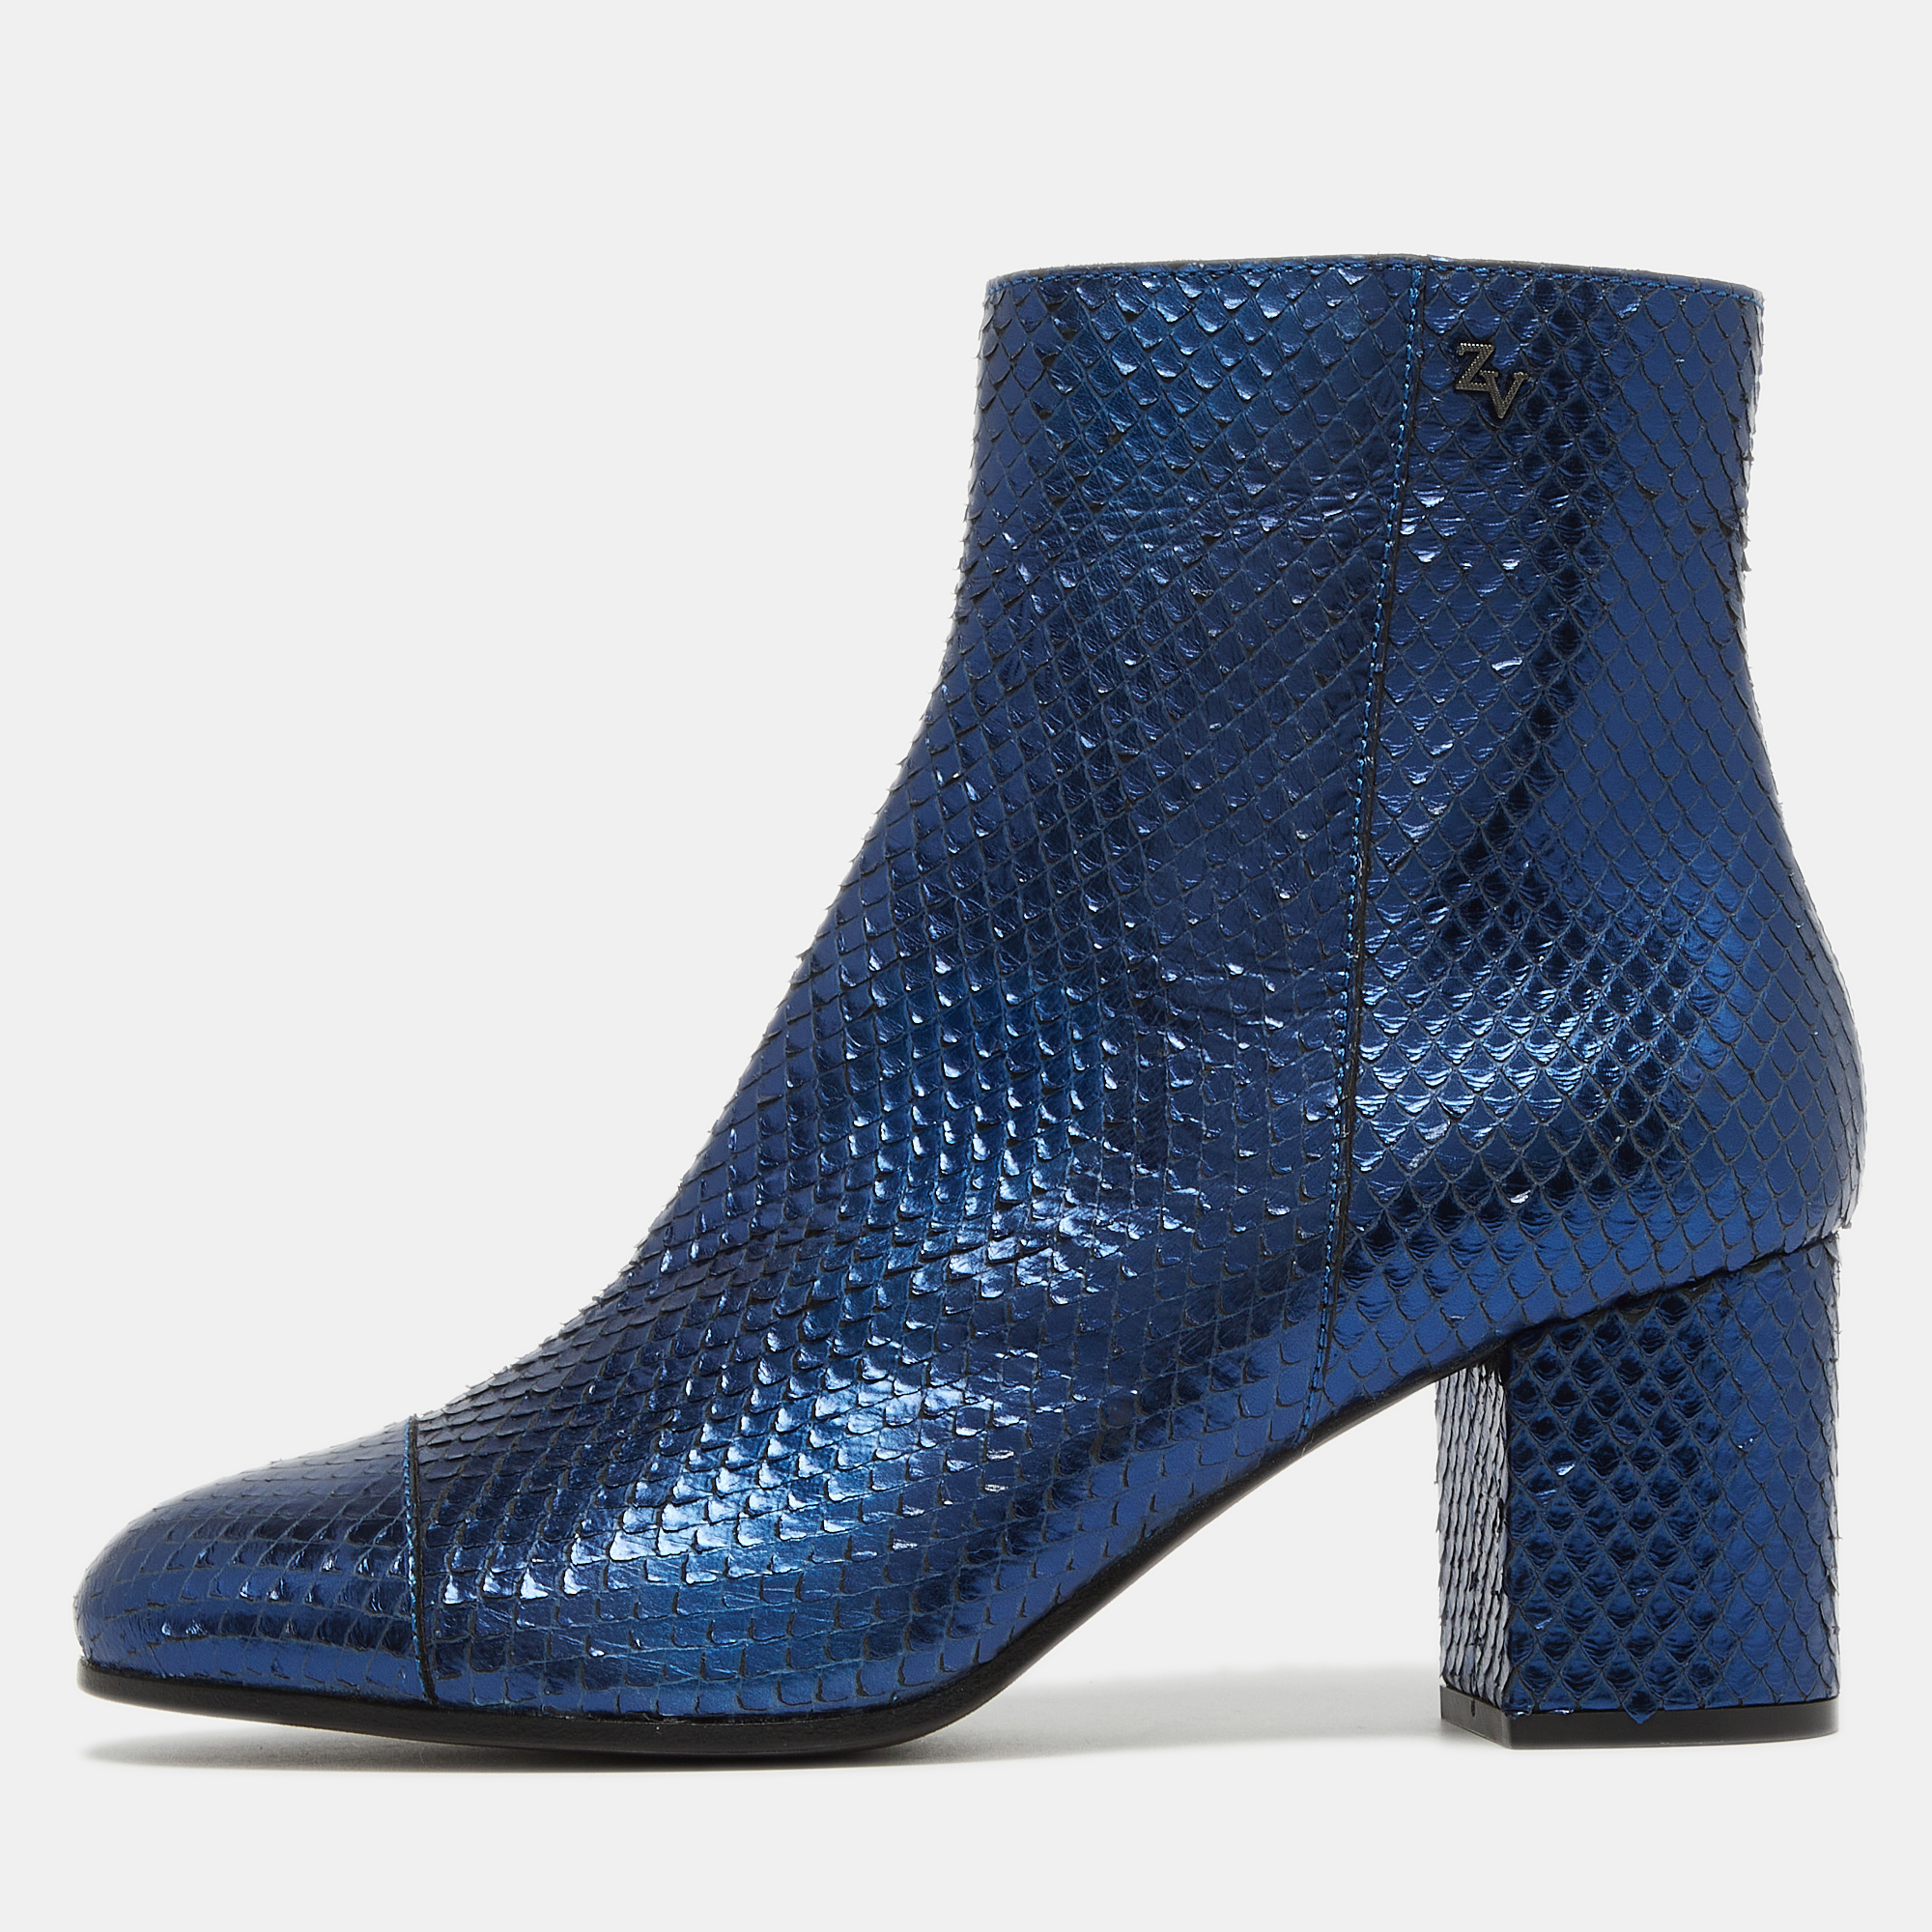 Zadig & voltaire metallic blue python ankle boots size 38